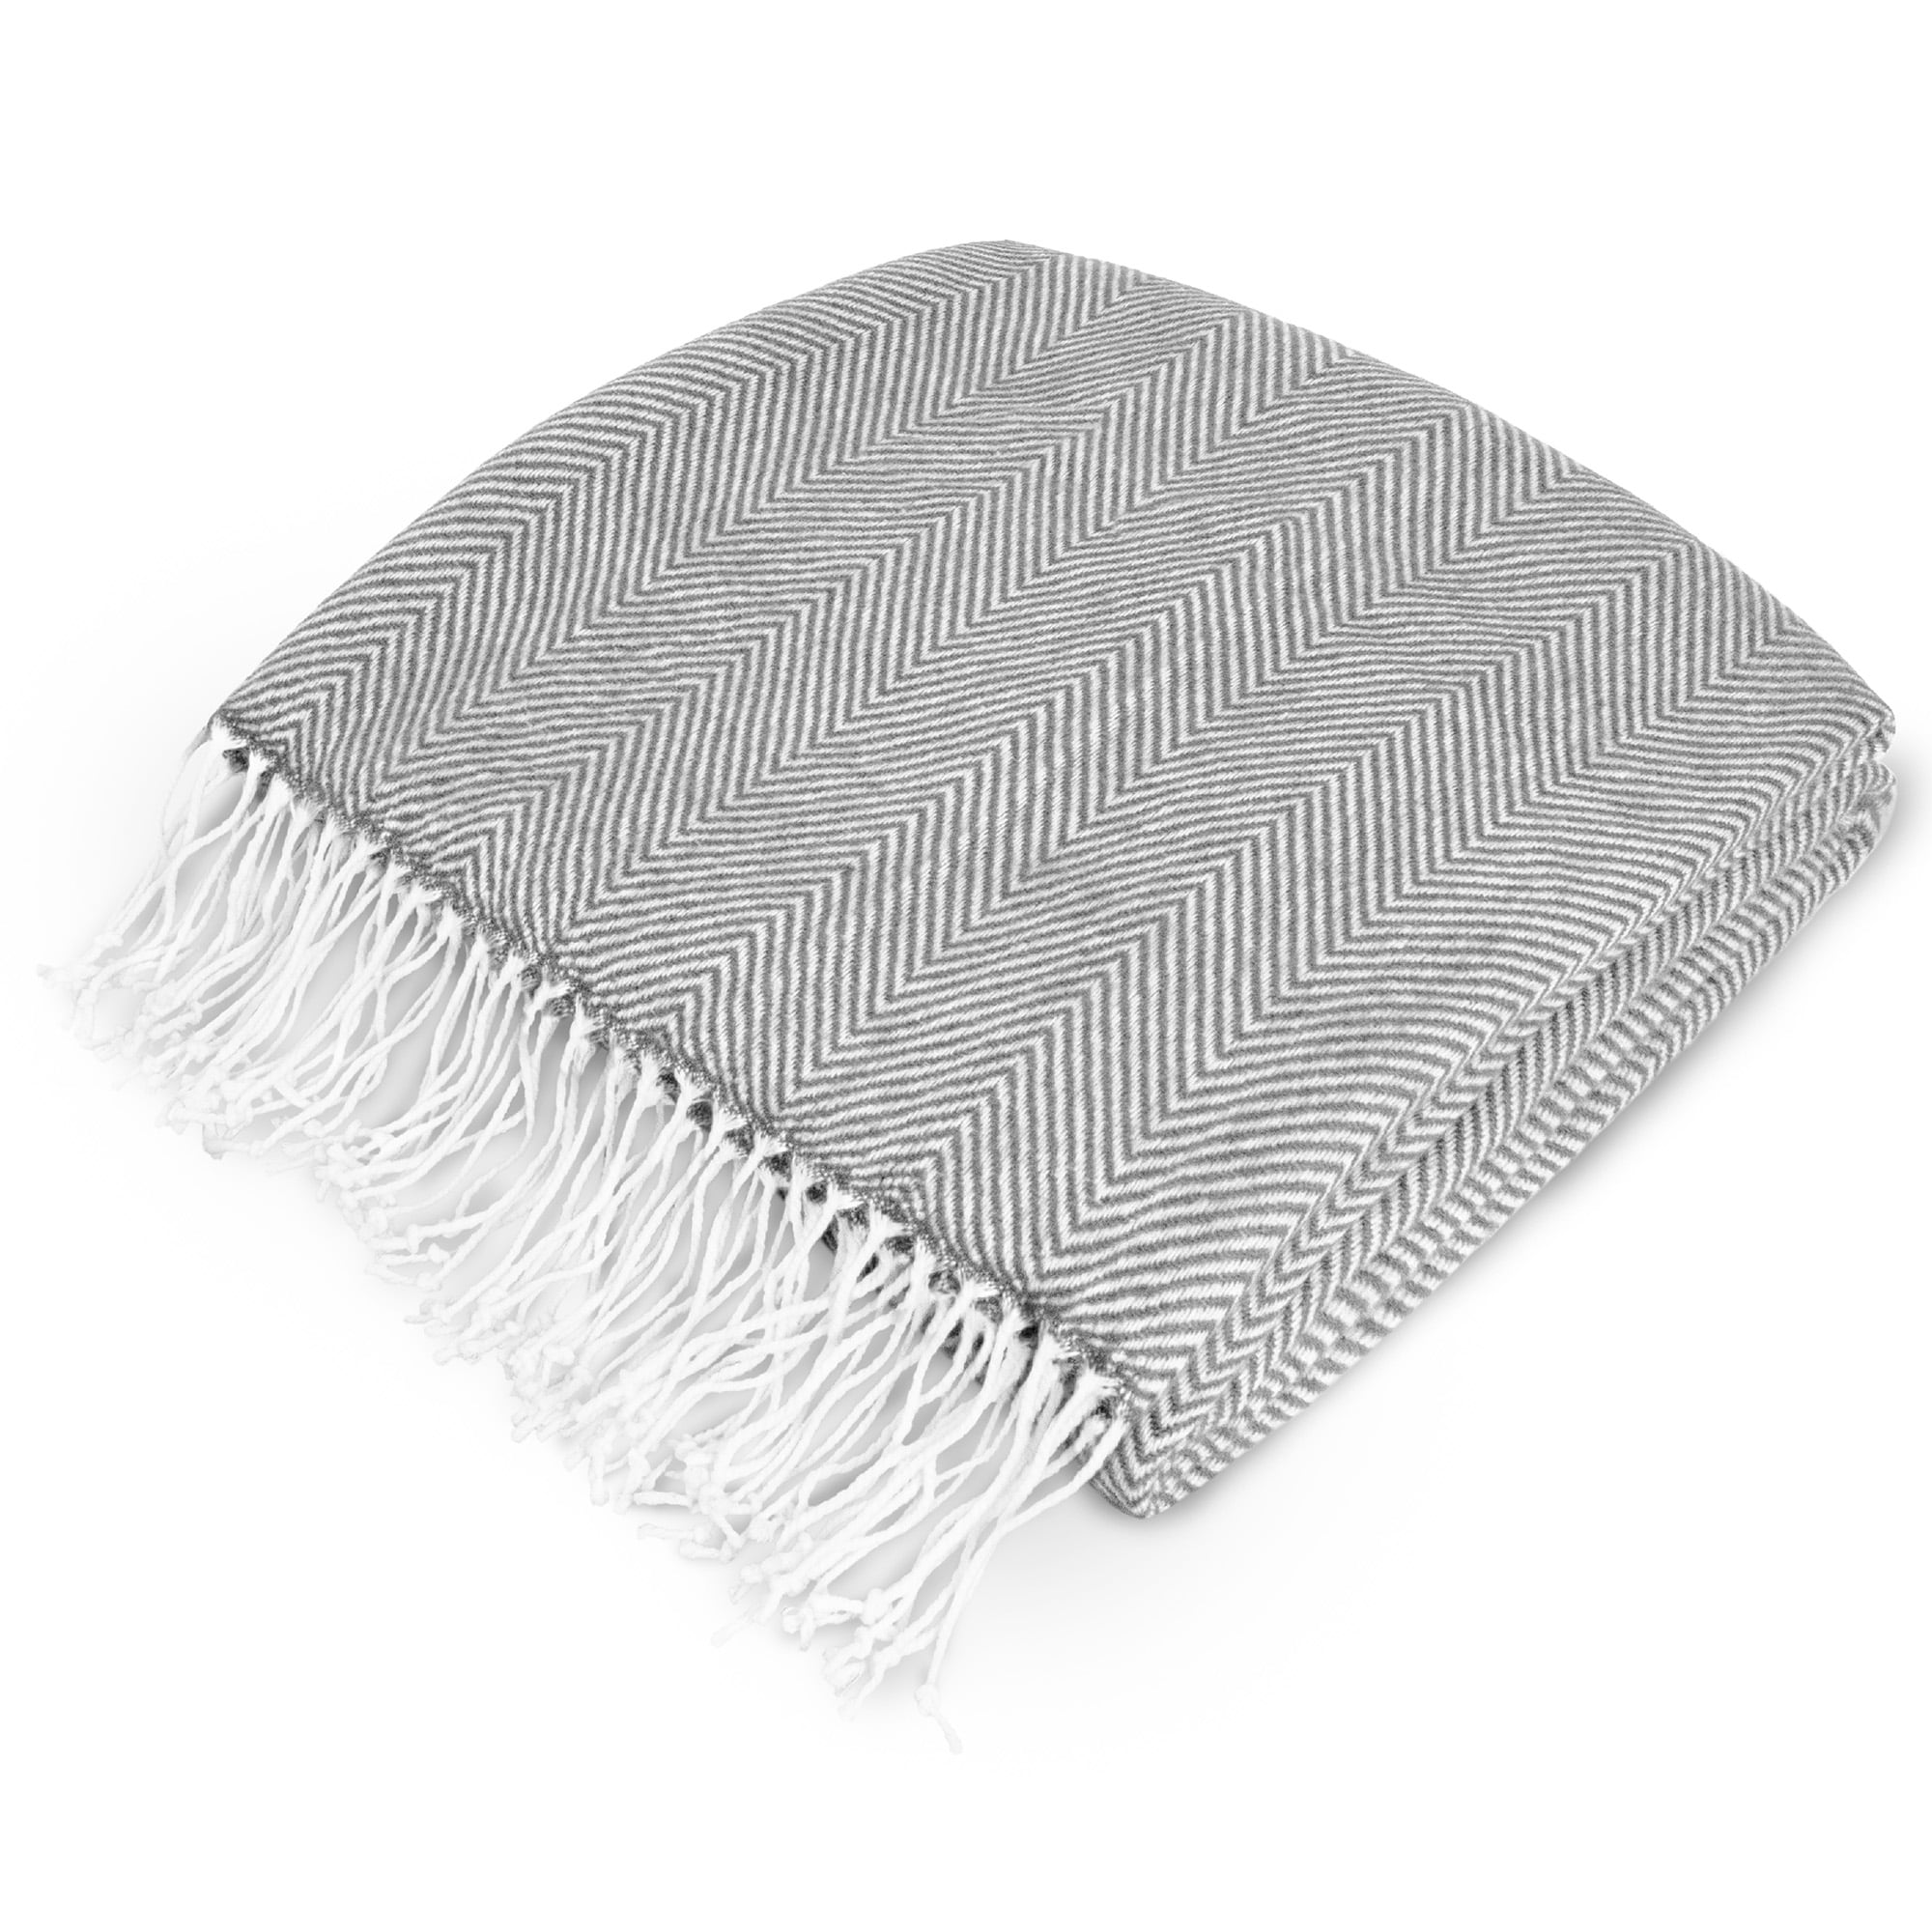 Chair Soft Woven Throw Blanket with Decorative Fringe Gray 50 x 60 in. Herringbone Blanket Lightweight for Bed Turkish Boho Chic Outdoor Office Sofa Chevron Pattern 